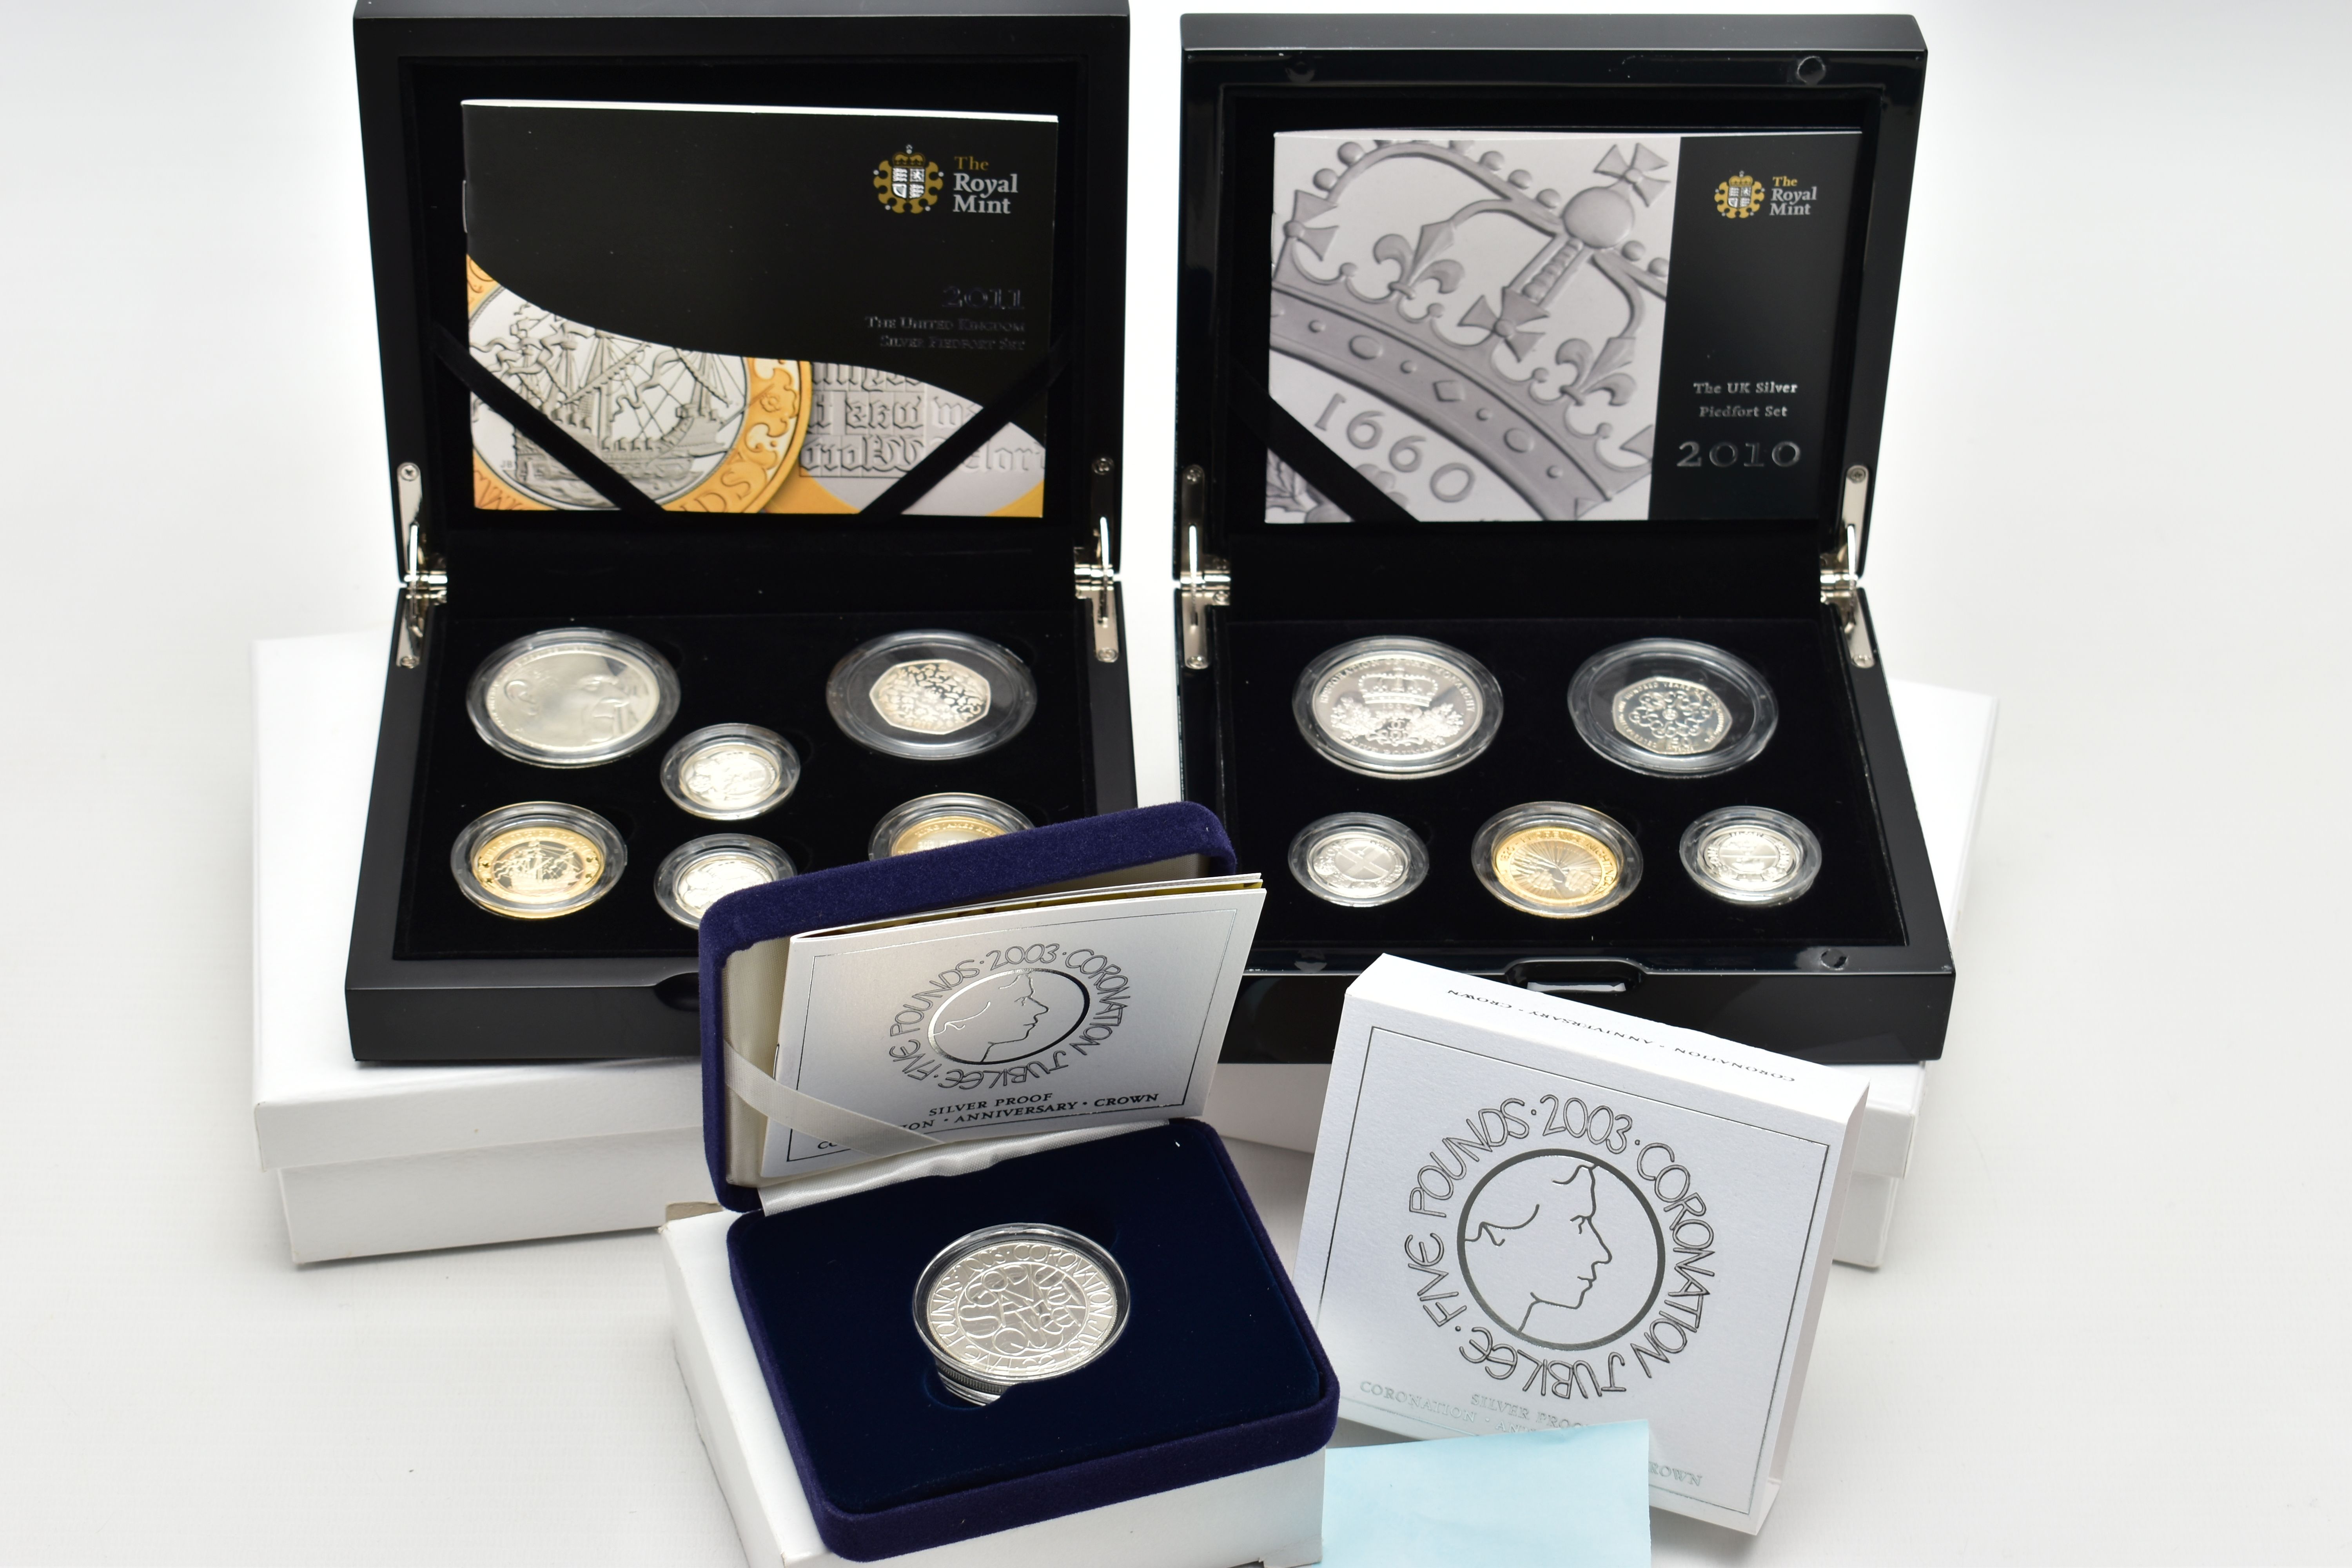 ROYAL MINT ELIZABETH II 2010, 2011, UK SILVER PROOF PIEDFORT COLLECTIONS, 2010 set is a £5 con